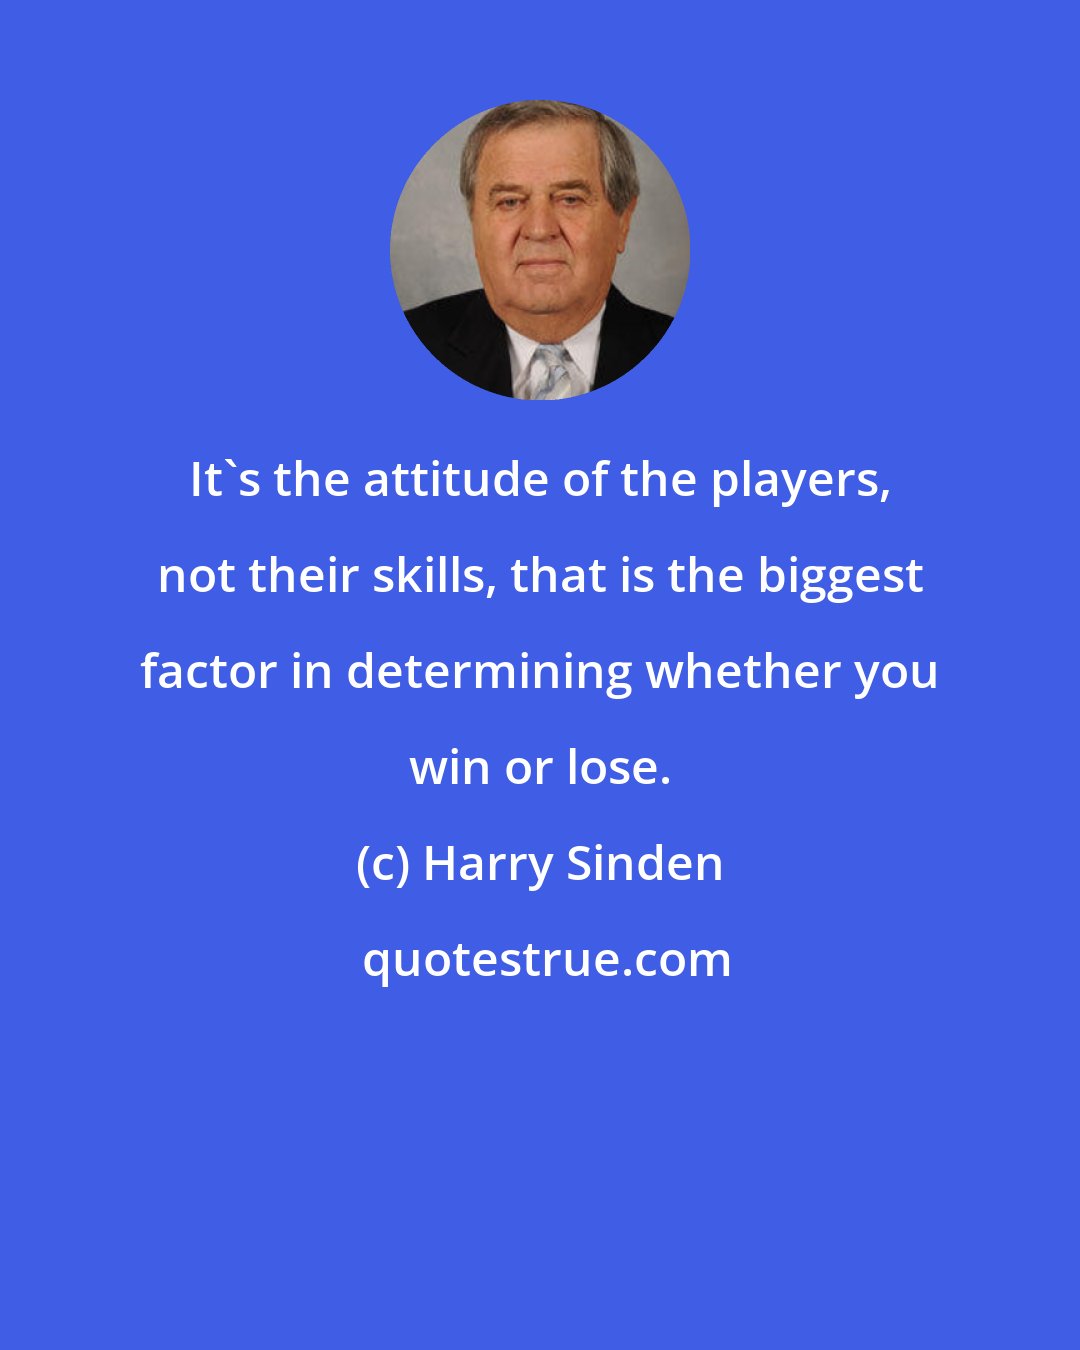 Harry Sinden: It's the attitude of the players, not their skills, that is the biggest factor in determining whether you win or lose.